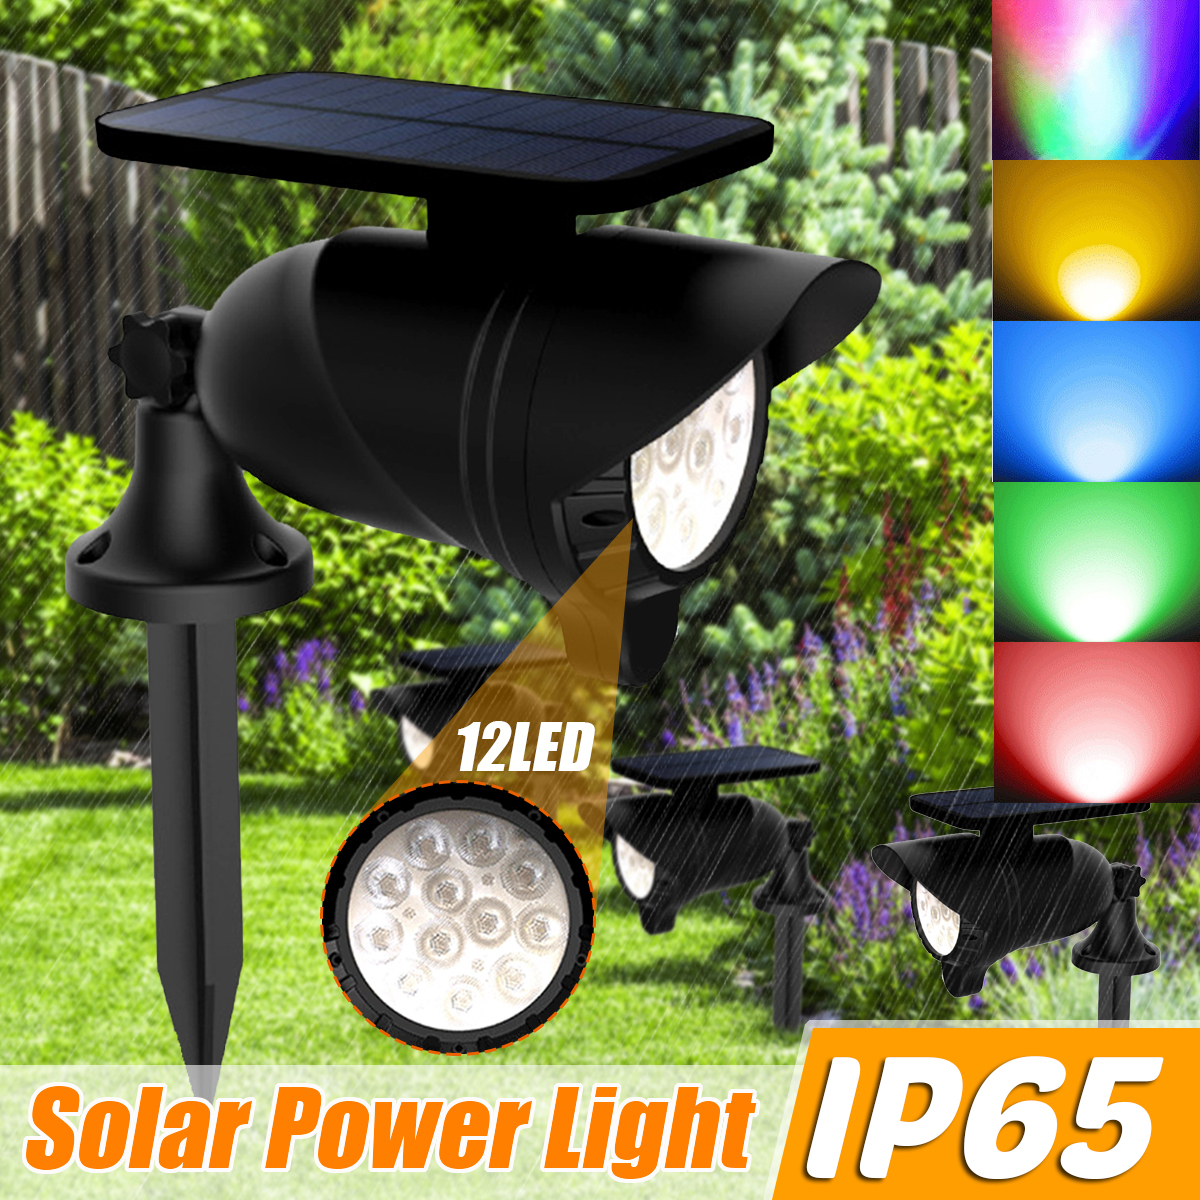 Waterproof-LED-Solar-Lawn-Light-ColorfulWarm-WhiteWhite-Outdoor-Wall-Ground-Garden-Pathway-Security--1724544-1